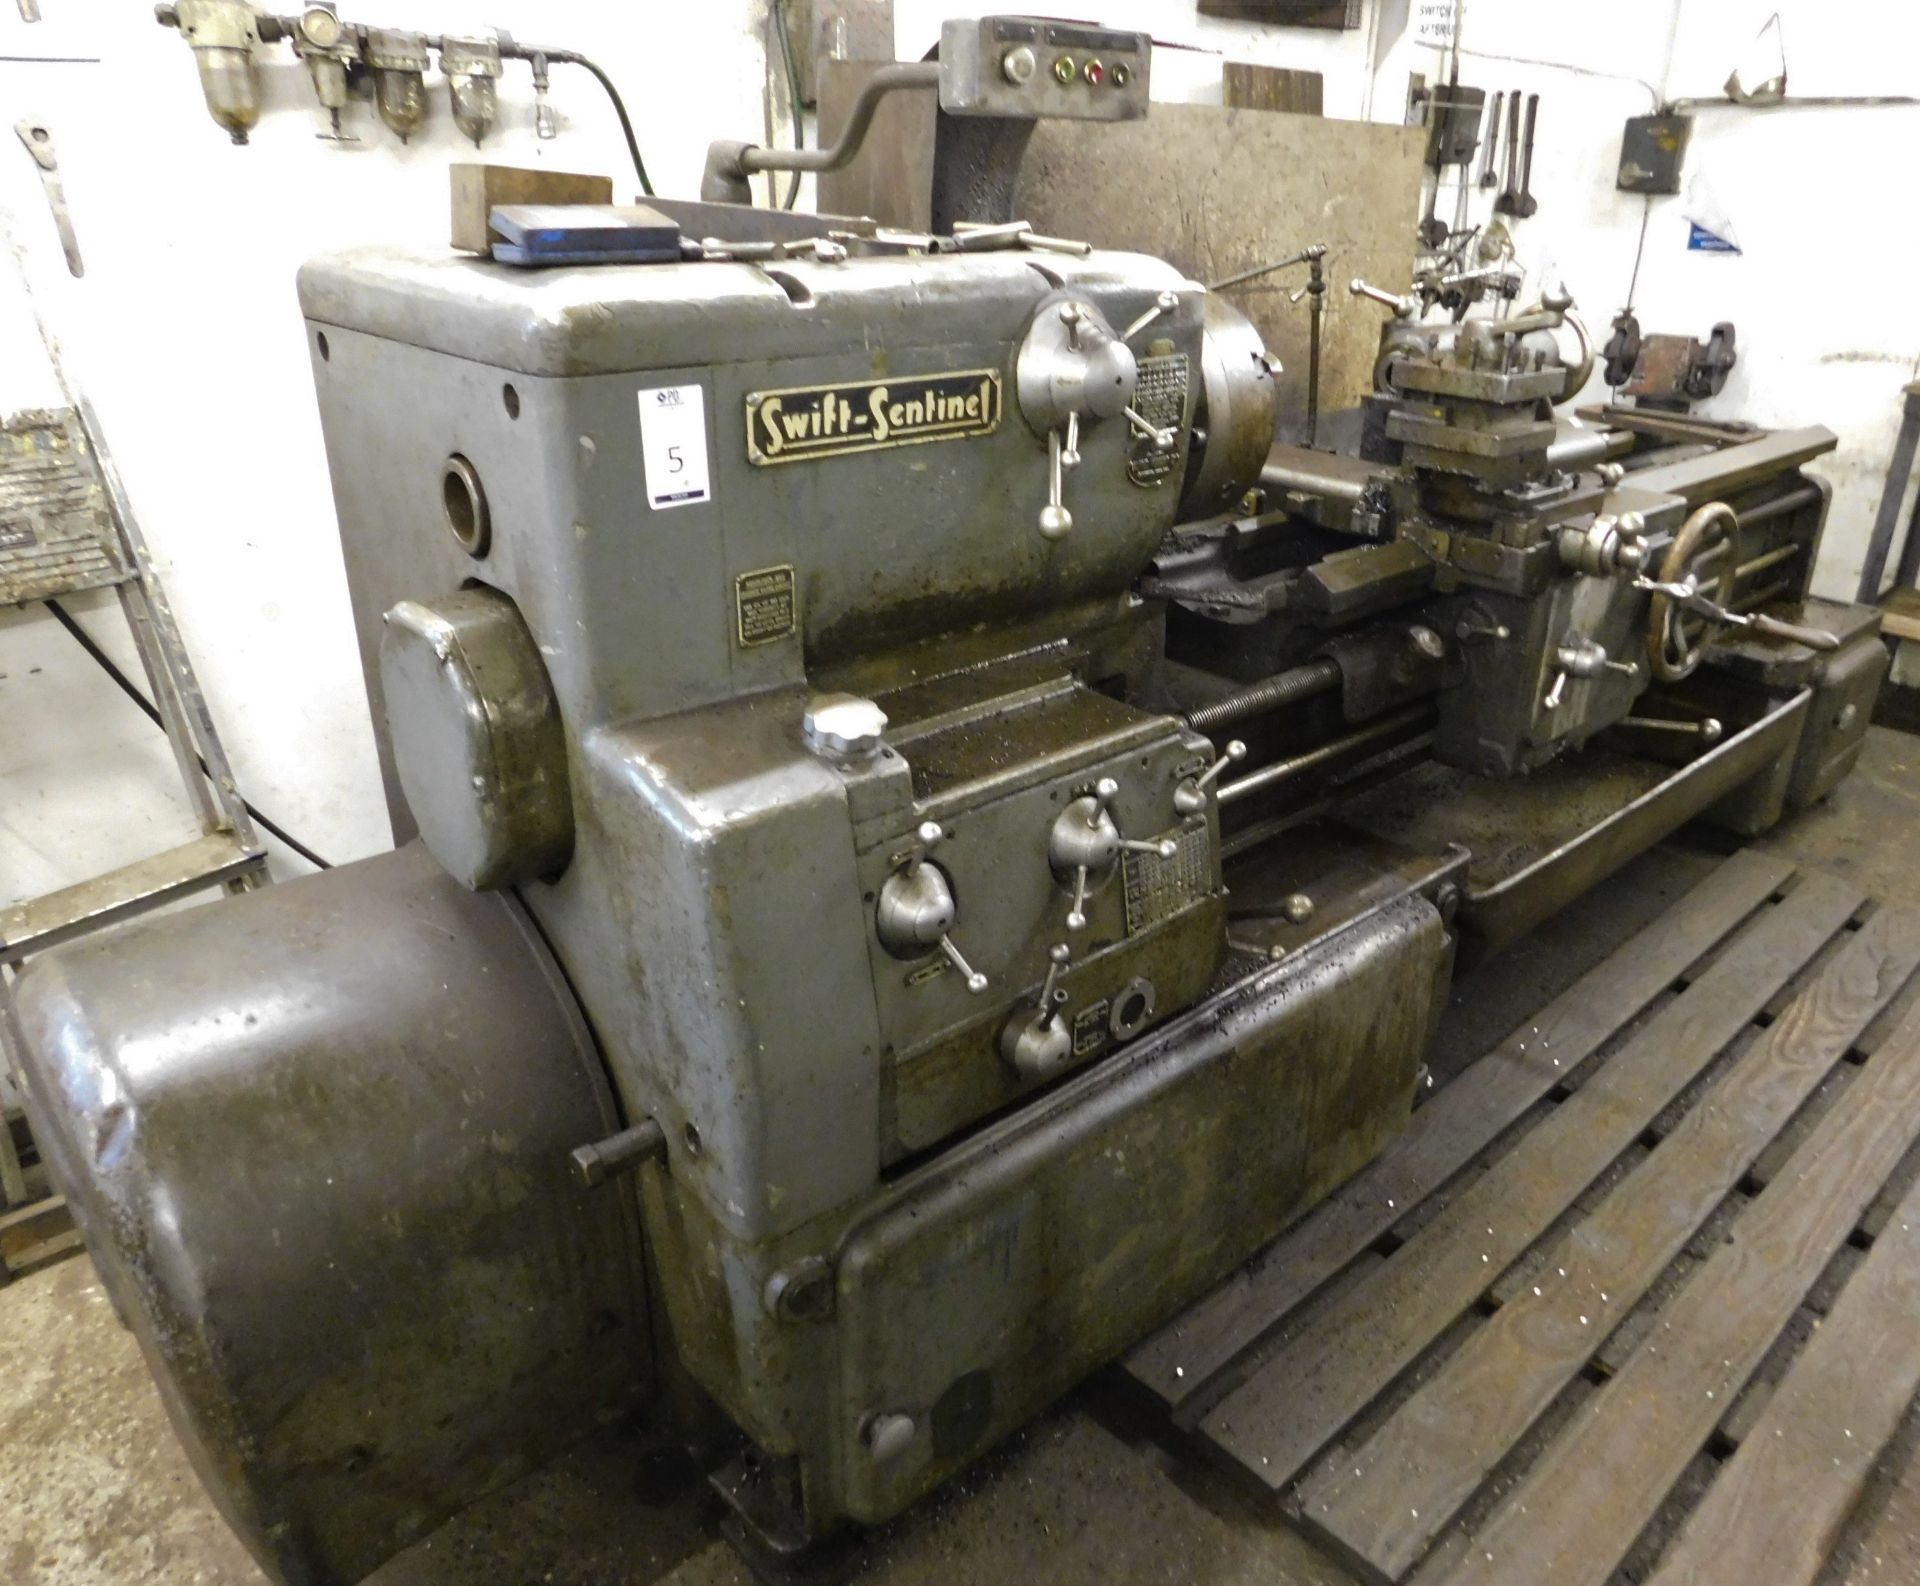 Alfred Herbert Swift Sentinel Lathe (Collection Monday 14th February Before 12 Noon) (Location: